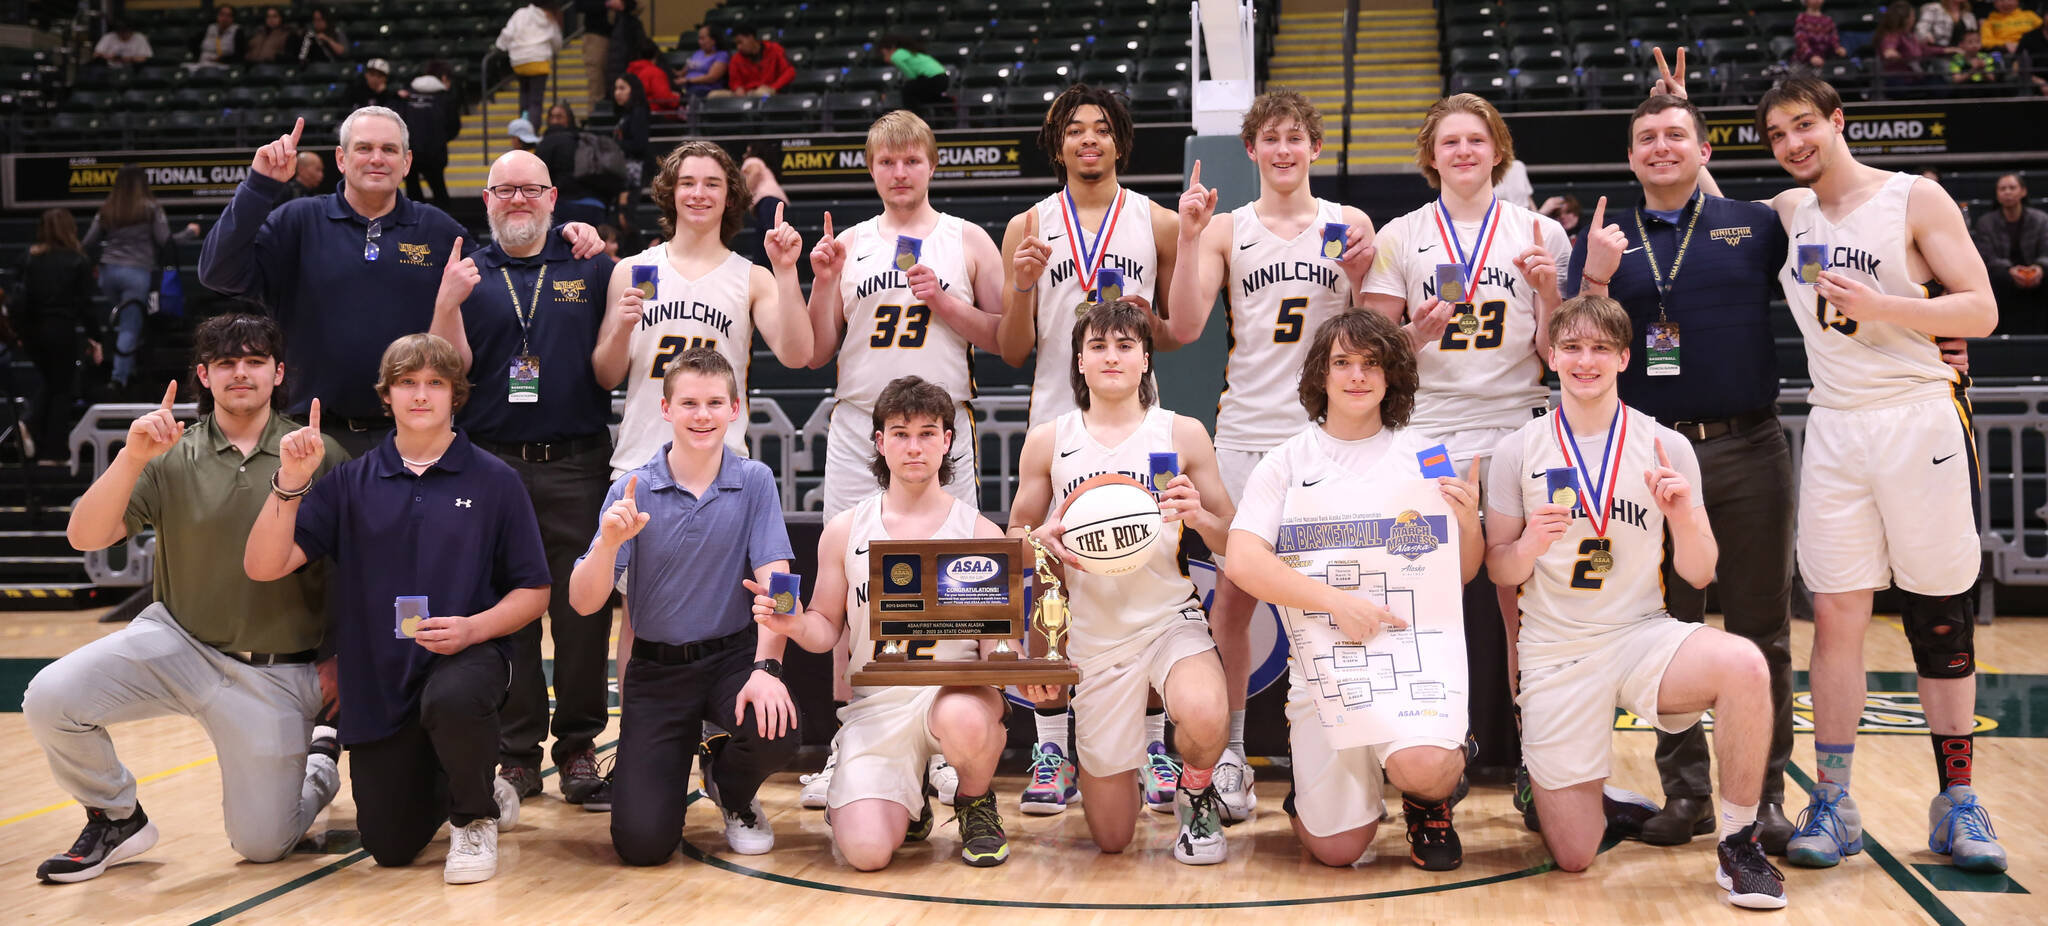 The Ninilchik boys basketball team celebrates their second straight Class 2A state championship Saturday, March 18, 2023, at the Alaska Airlines Center in Anchorage, Alaska. (Photo courtesy of Robin Moore)